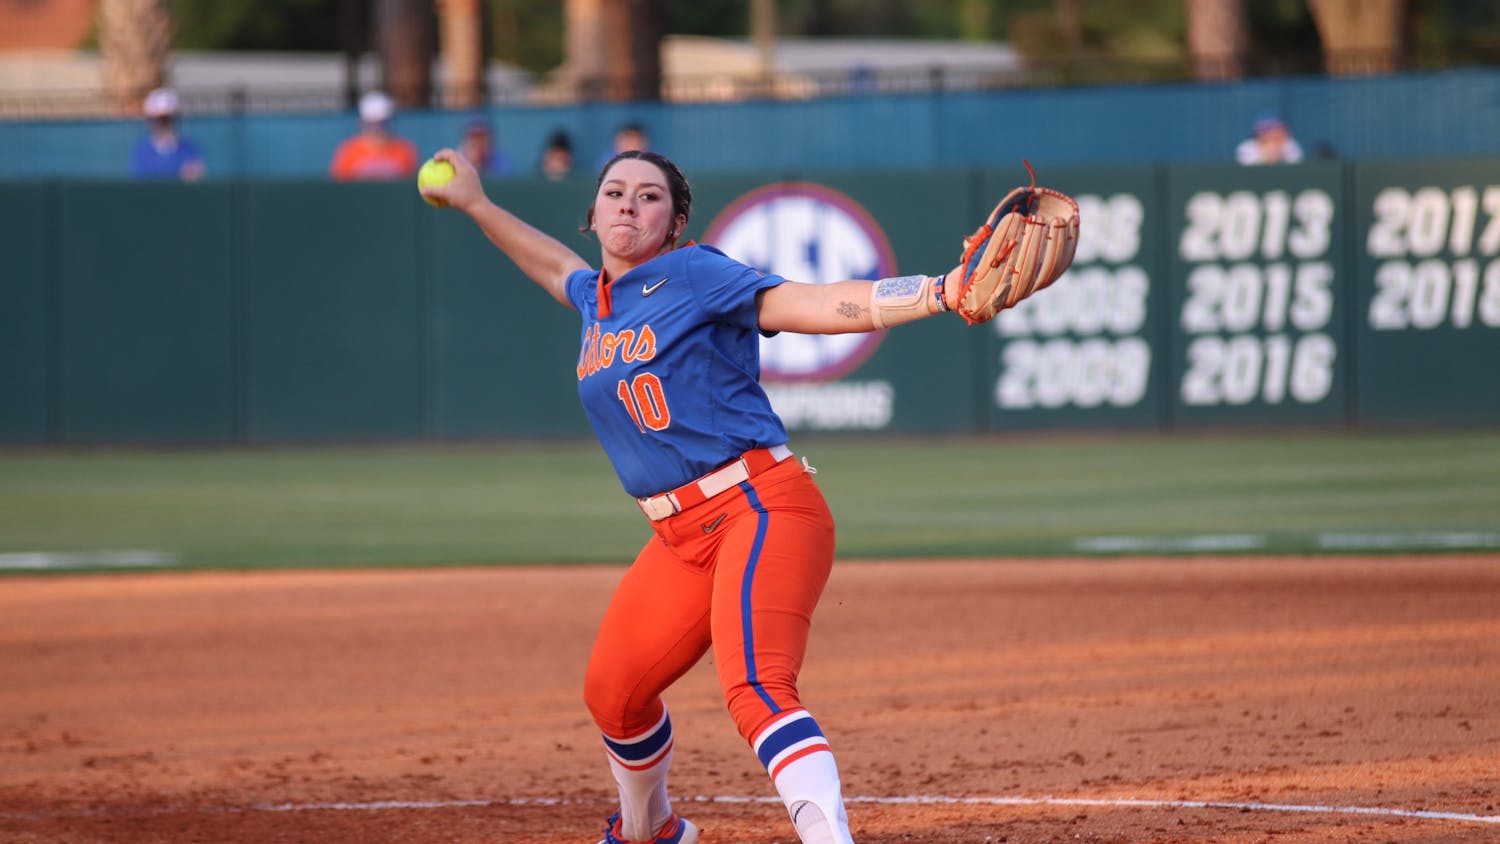 Natalie Lugo steps through and delivers a pitch against South Carolina on April 24th. Lugo delivered six scoreless innings of relief in Florida&#x27;s 7-1 victory over Oregon State Thursday.